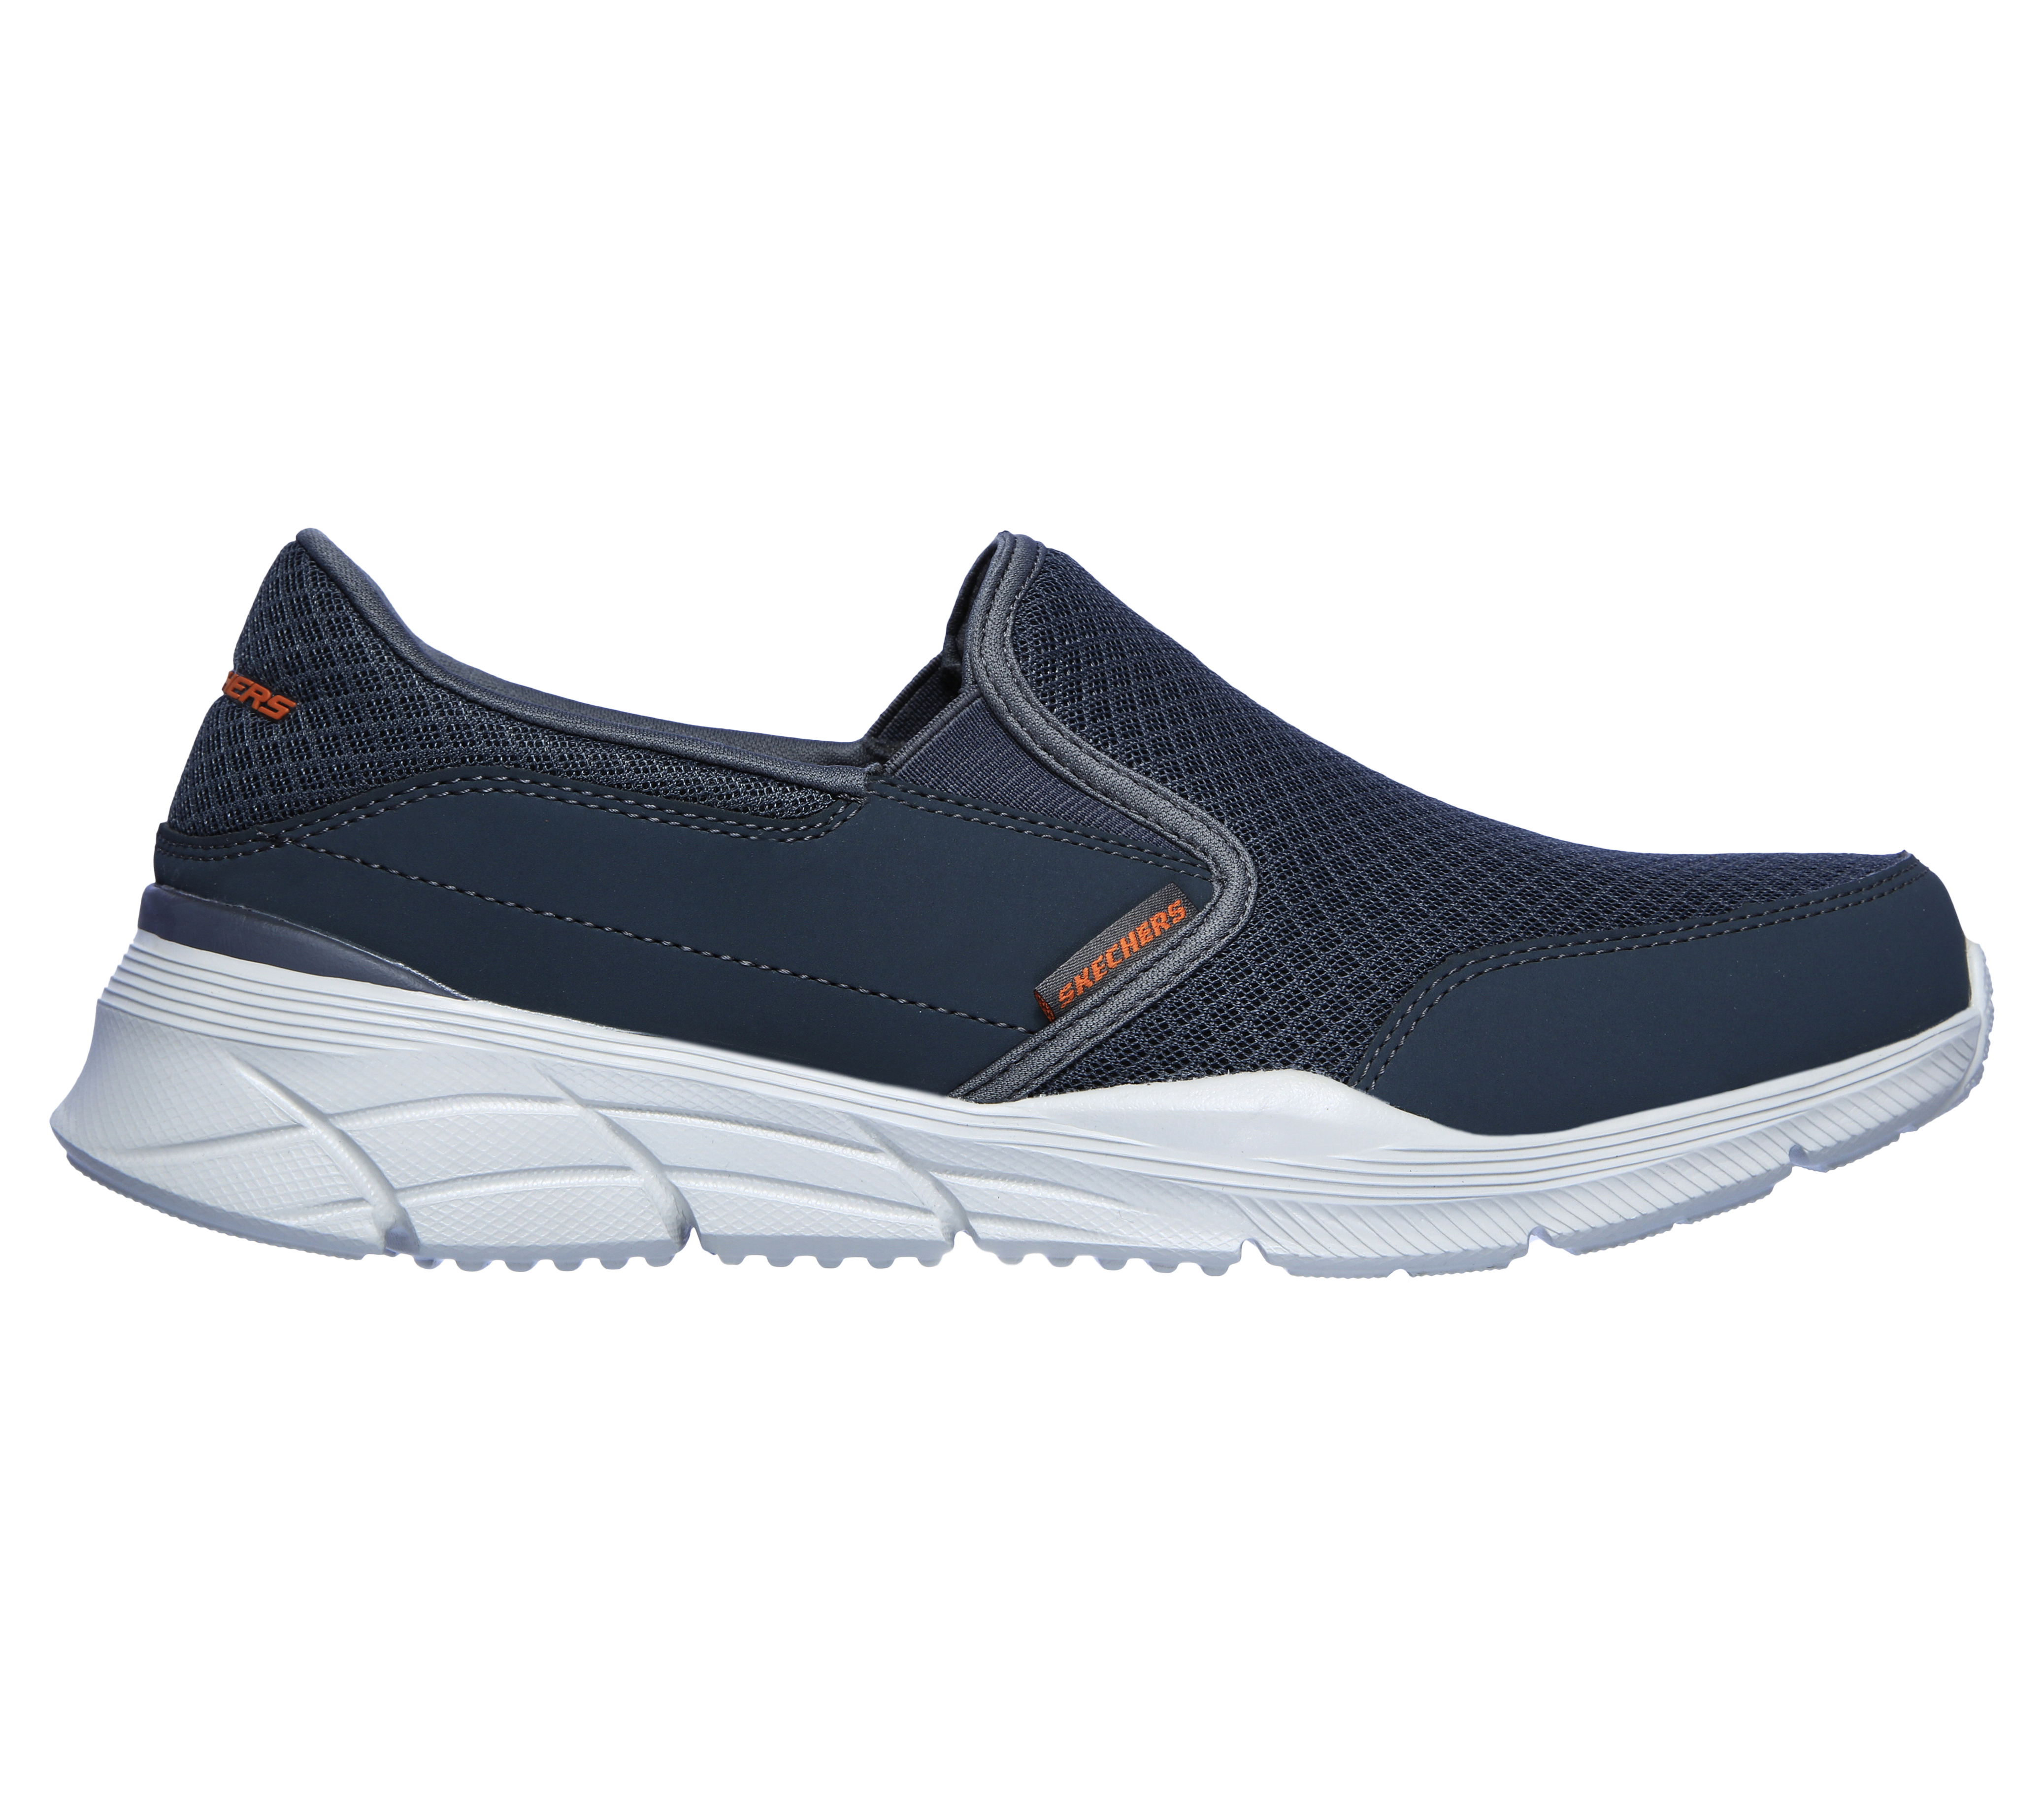 Shop the Relaxed Fit: Equalizer 4.0 - Persisting | SKECHERS